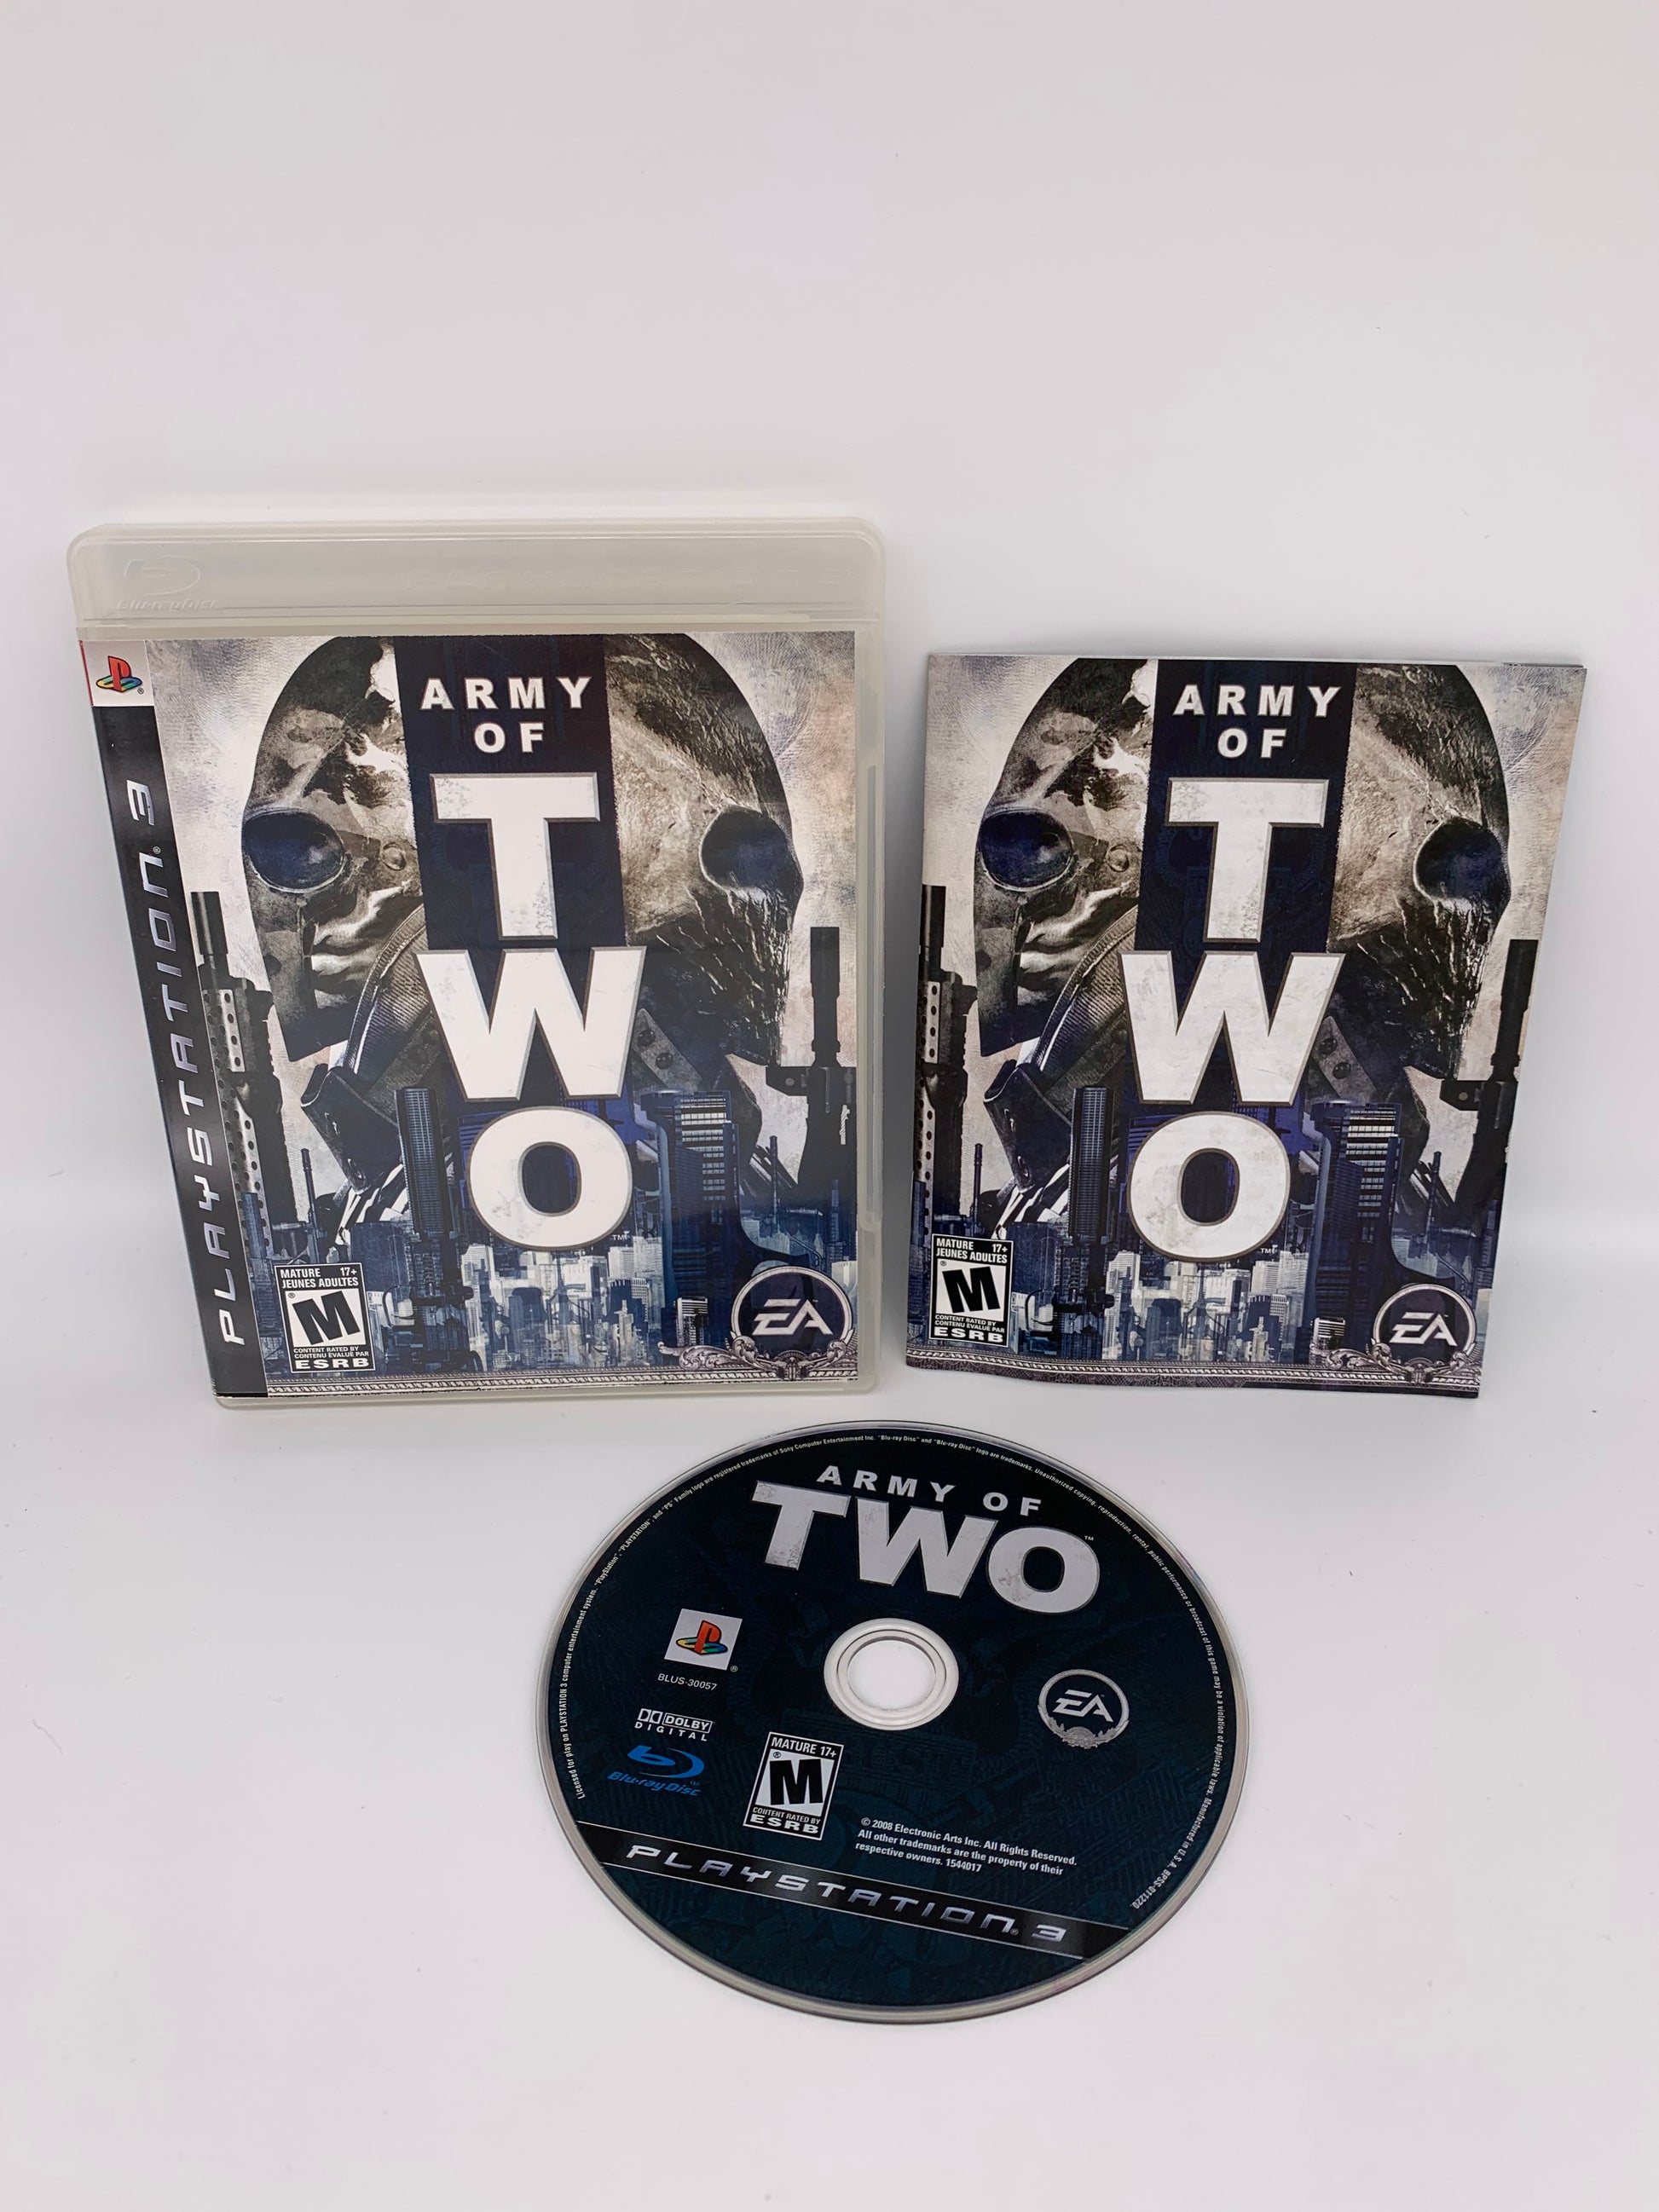 PiXEL-RETRO.COM : SONY PLAYSTATION 3 (PS3) COMPLET CIB BOX MANUAL GAME NTSC ARMY OF TWO